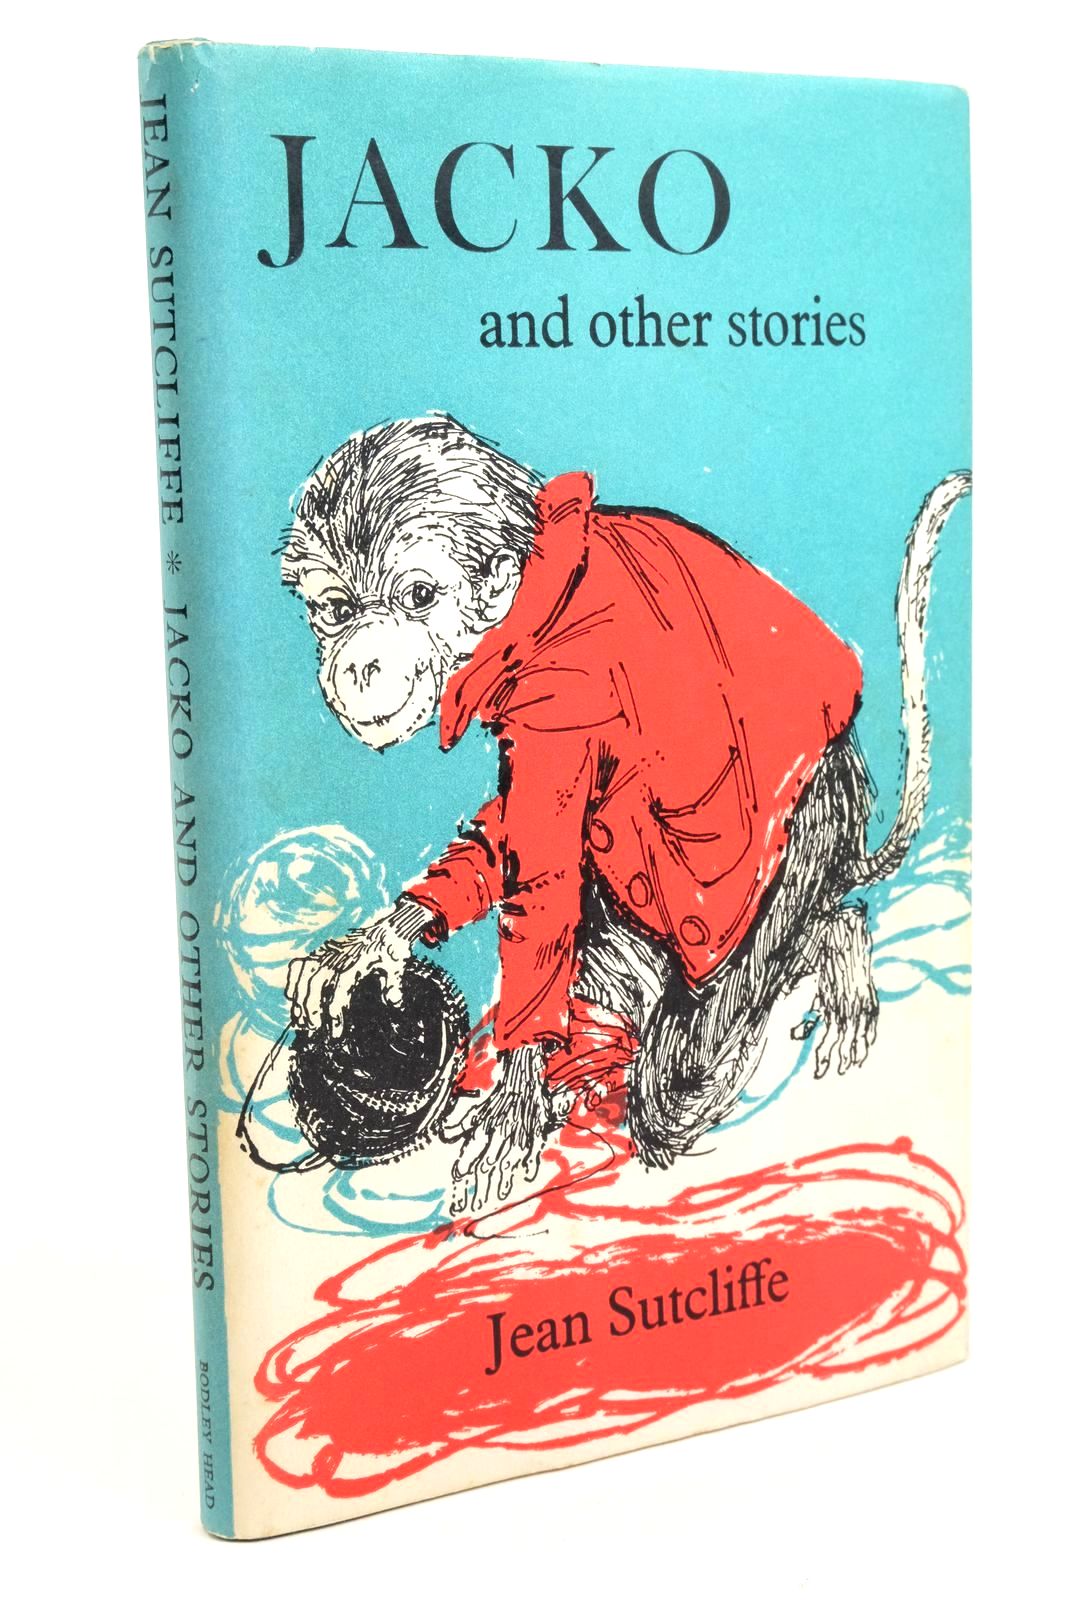 Photo of JACKO AND OTHER STORIES written by Sutcliffe, Jean illustrated by Hughes, Shirley published by The Bodley Head Ltd (STOCK CODE: 1322205)  for sale by Stella & Rose's Books